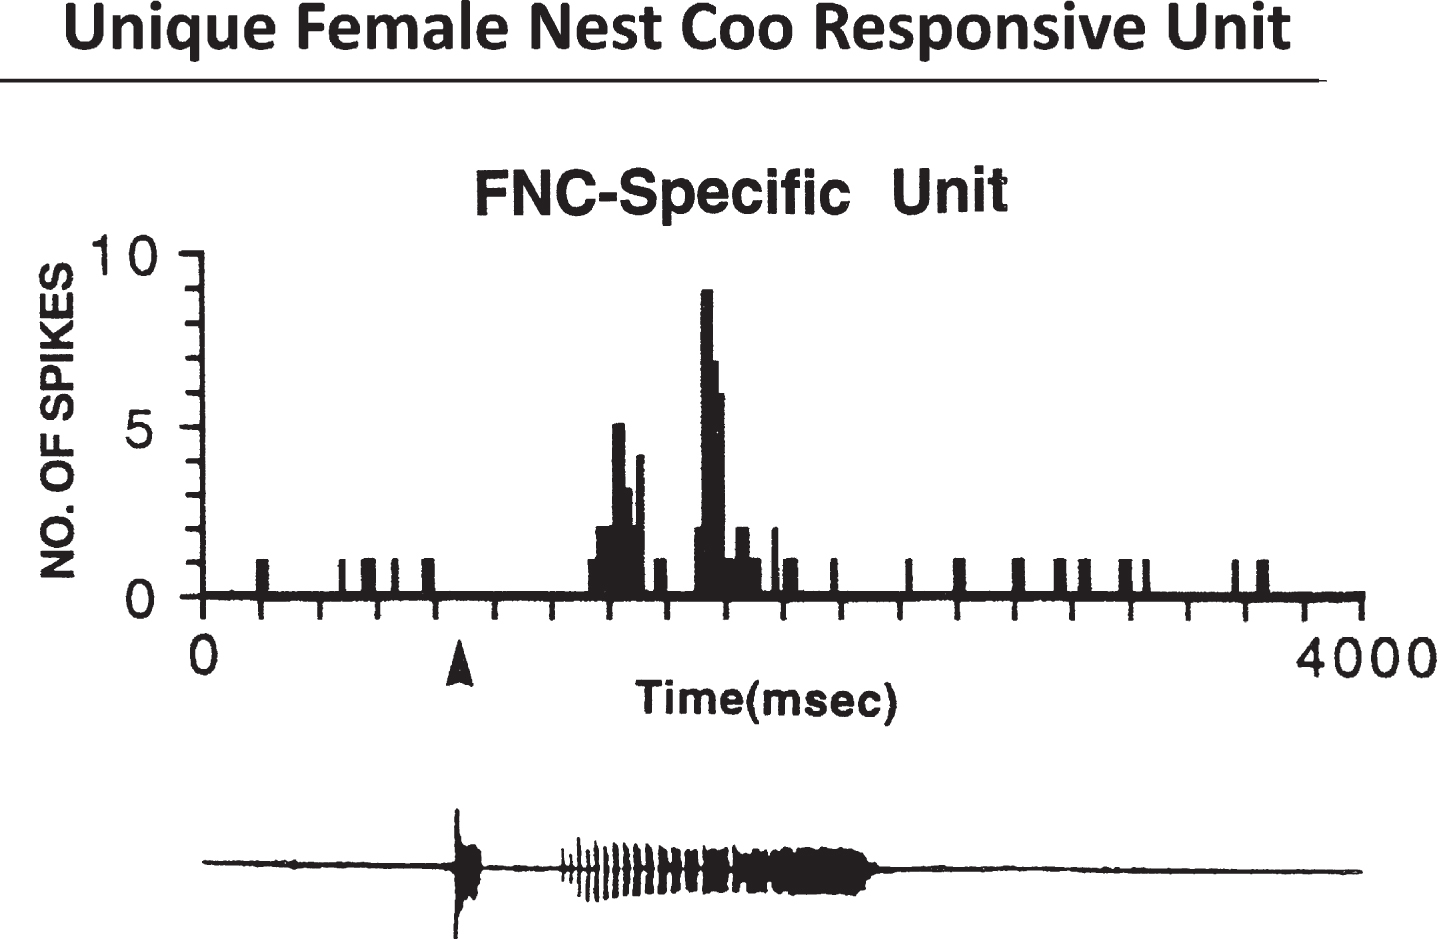 Female Coo Specific Units 960127. Top, Histogram shows the unit’s response to the female-nest-coo stimulus presented at 70 +/-5 bB SPL. Bottom, Computer amplitude display of the female nest coo. Courtesy of Cheng et al. J. of Neuroscience 1998;18:5477-5489.